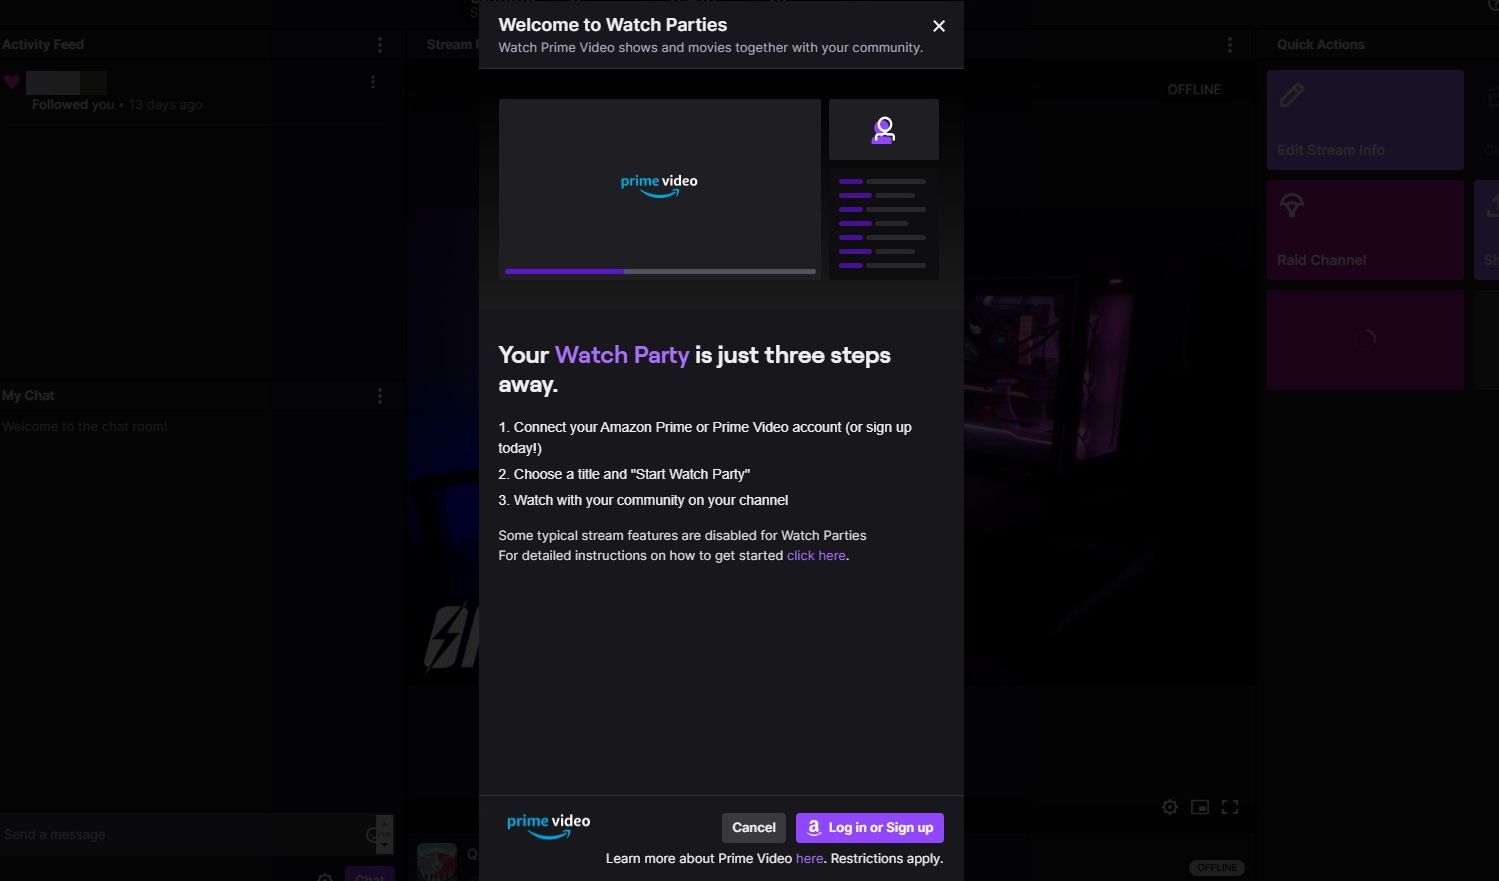 Connecting Amazon Prime to Twitch for Watch Parties